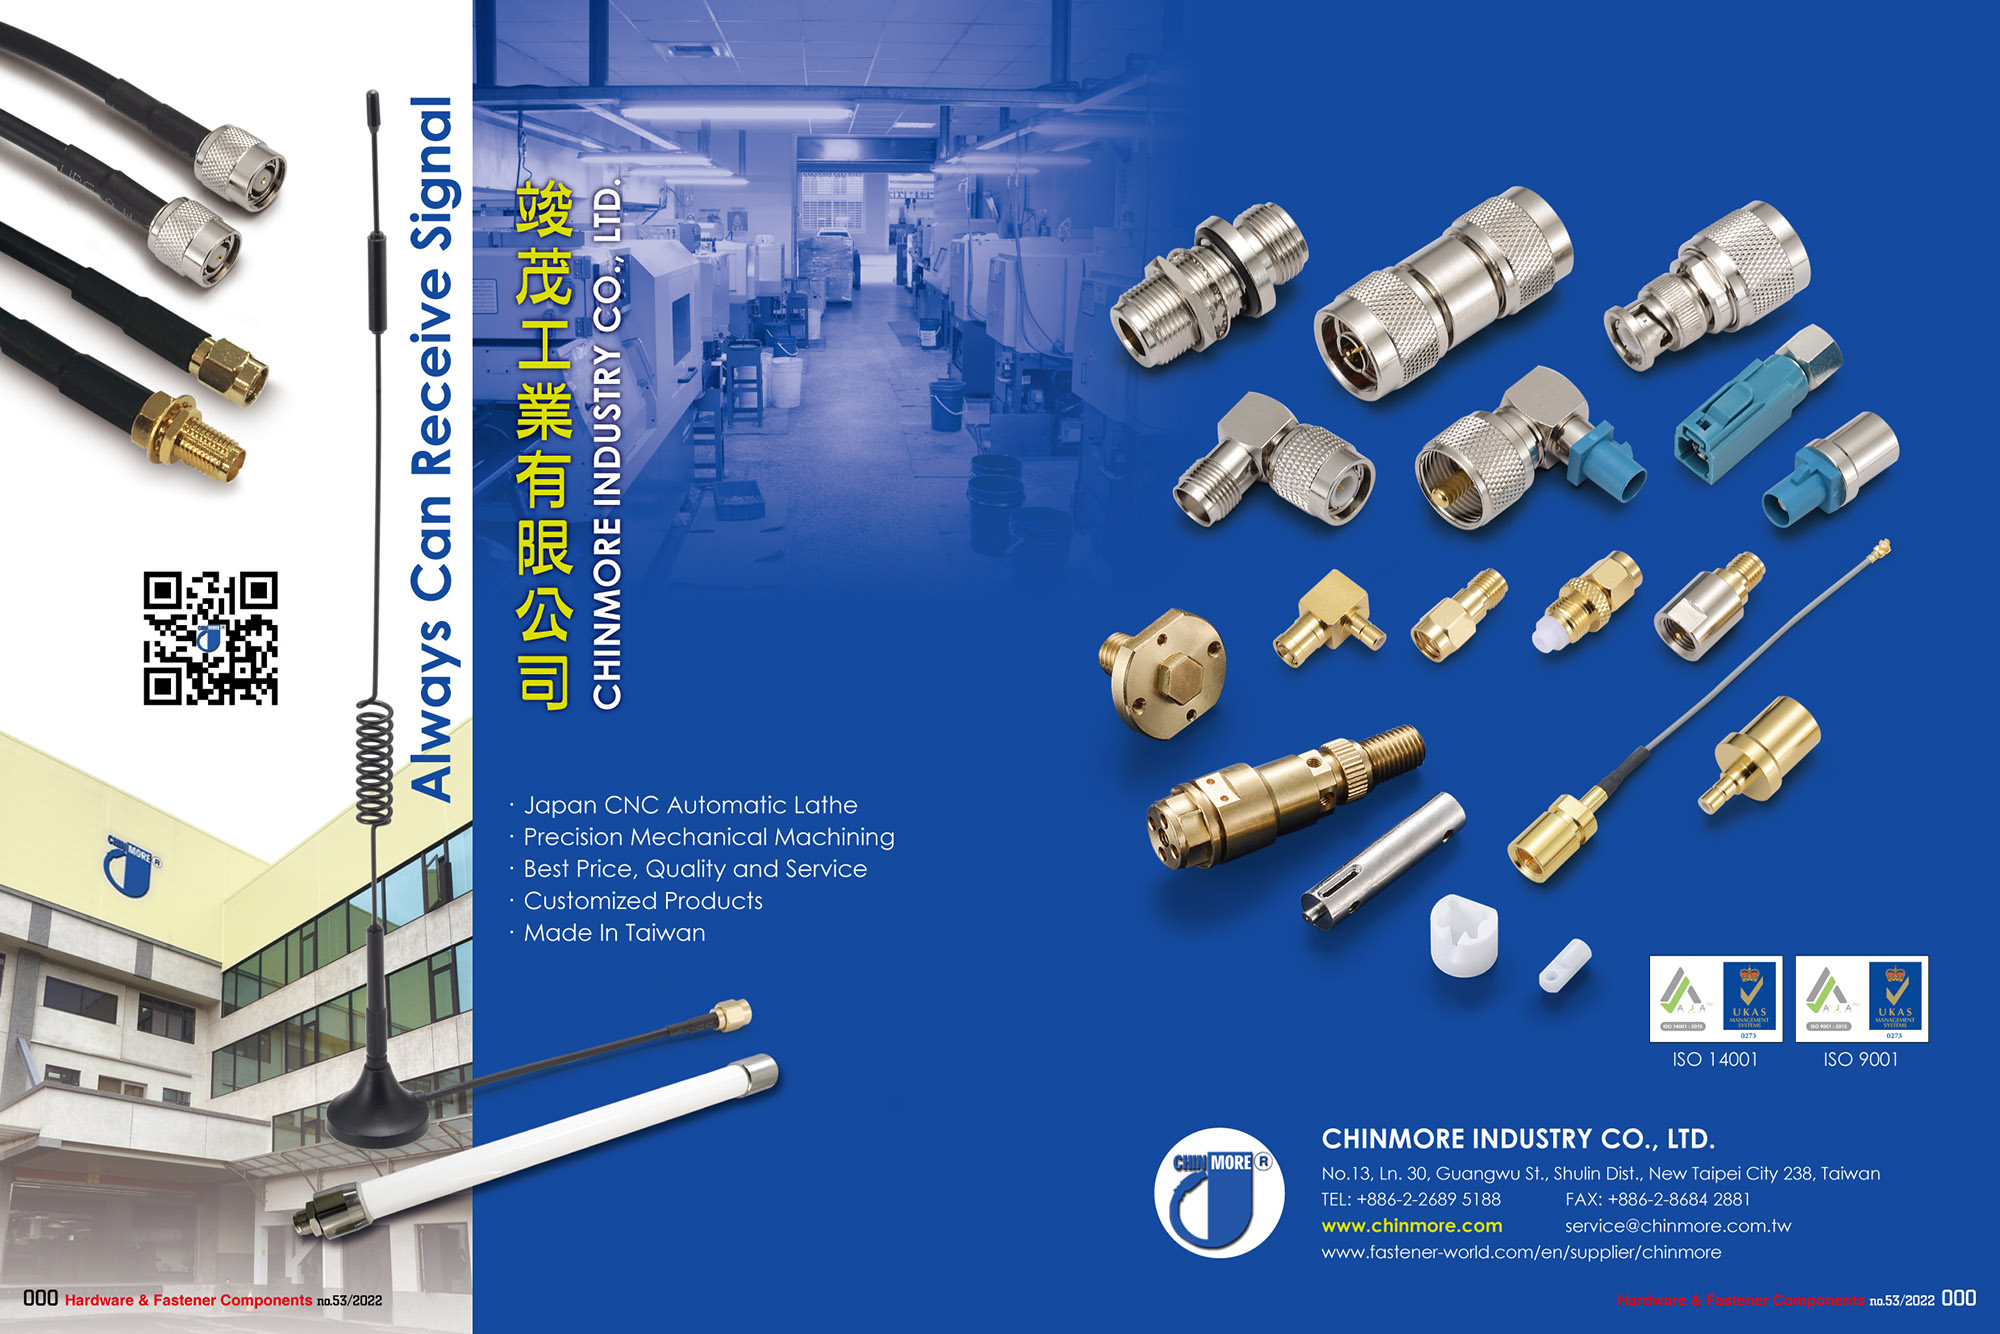 CHINMORE INDUSTRY CO., LTD. , Japan CNC Automatic Lathe, Precision Mechanical Machining, Precision Parts, ODM, OEM